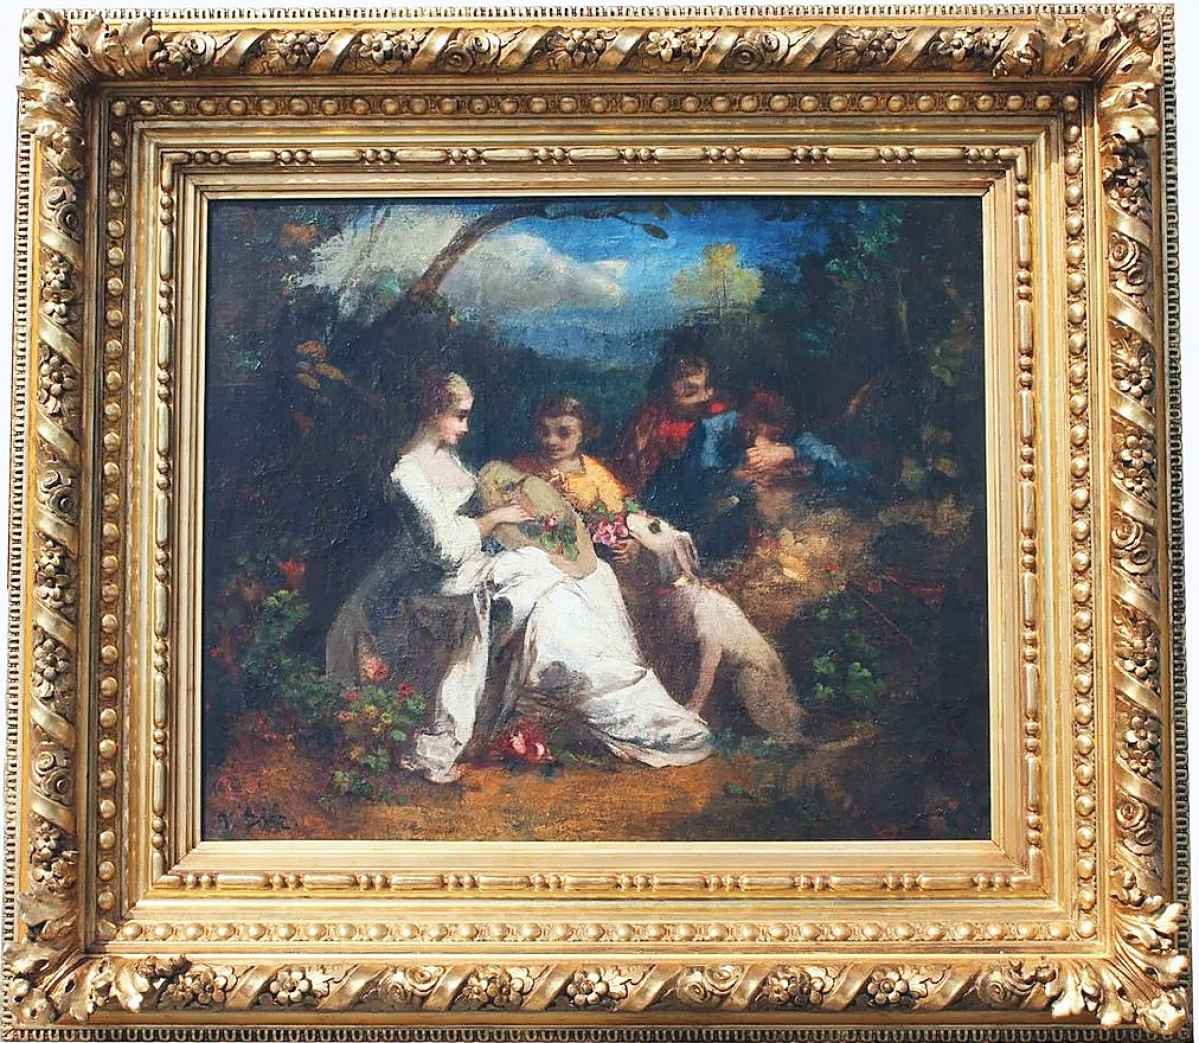 Narcisse-Virgilio Diaz de la Pena’s landscape with figures measured 38 by 42 inches in the frame and brought $18,150 ($10/15,000).